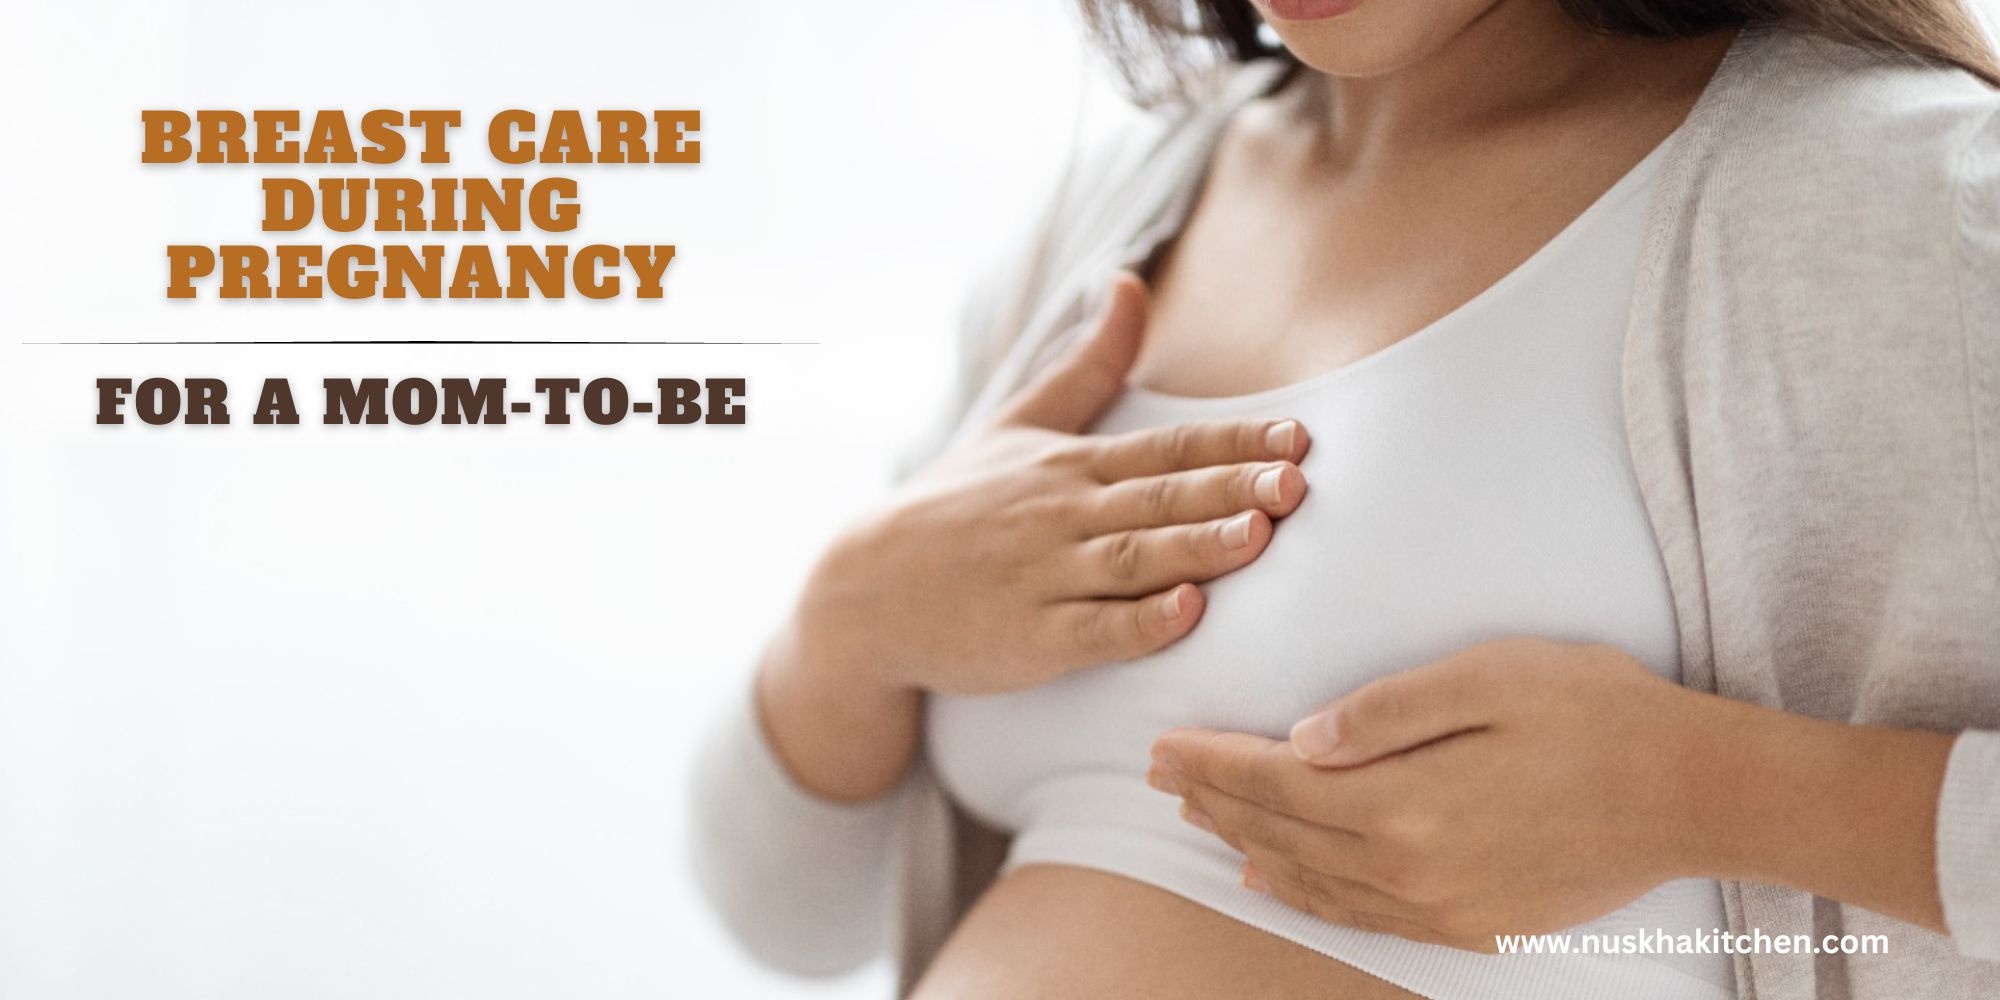 Breast Care During Pregnancy: Importance, Benefits, Tips